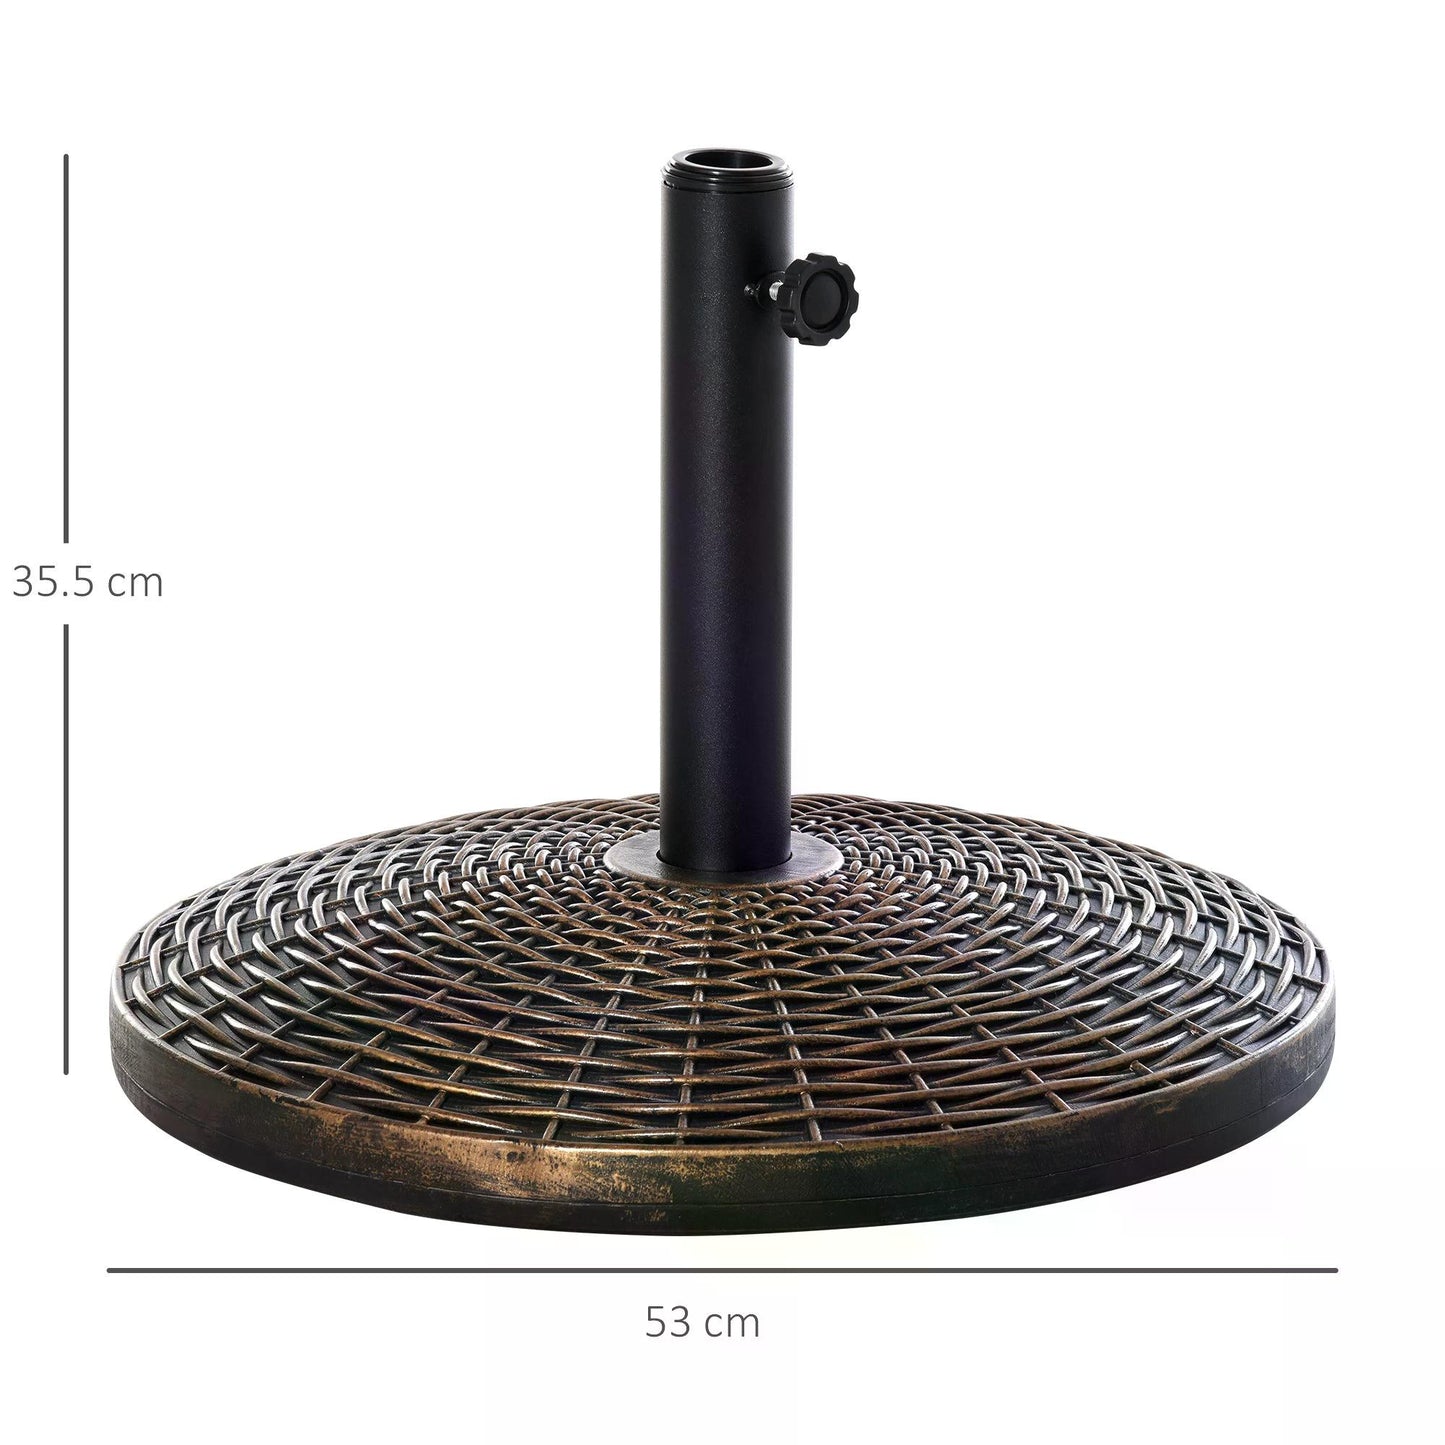 Outsunny Patio Parasol Base: Weighted 25kg Stand for Outdoor Umbrellas, Weather-Resistant, Jet Black